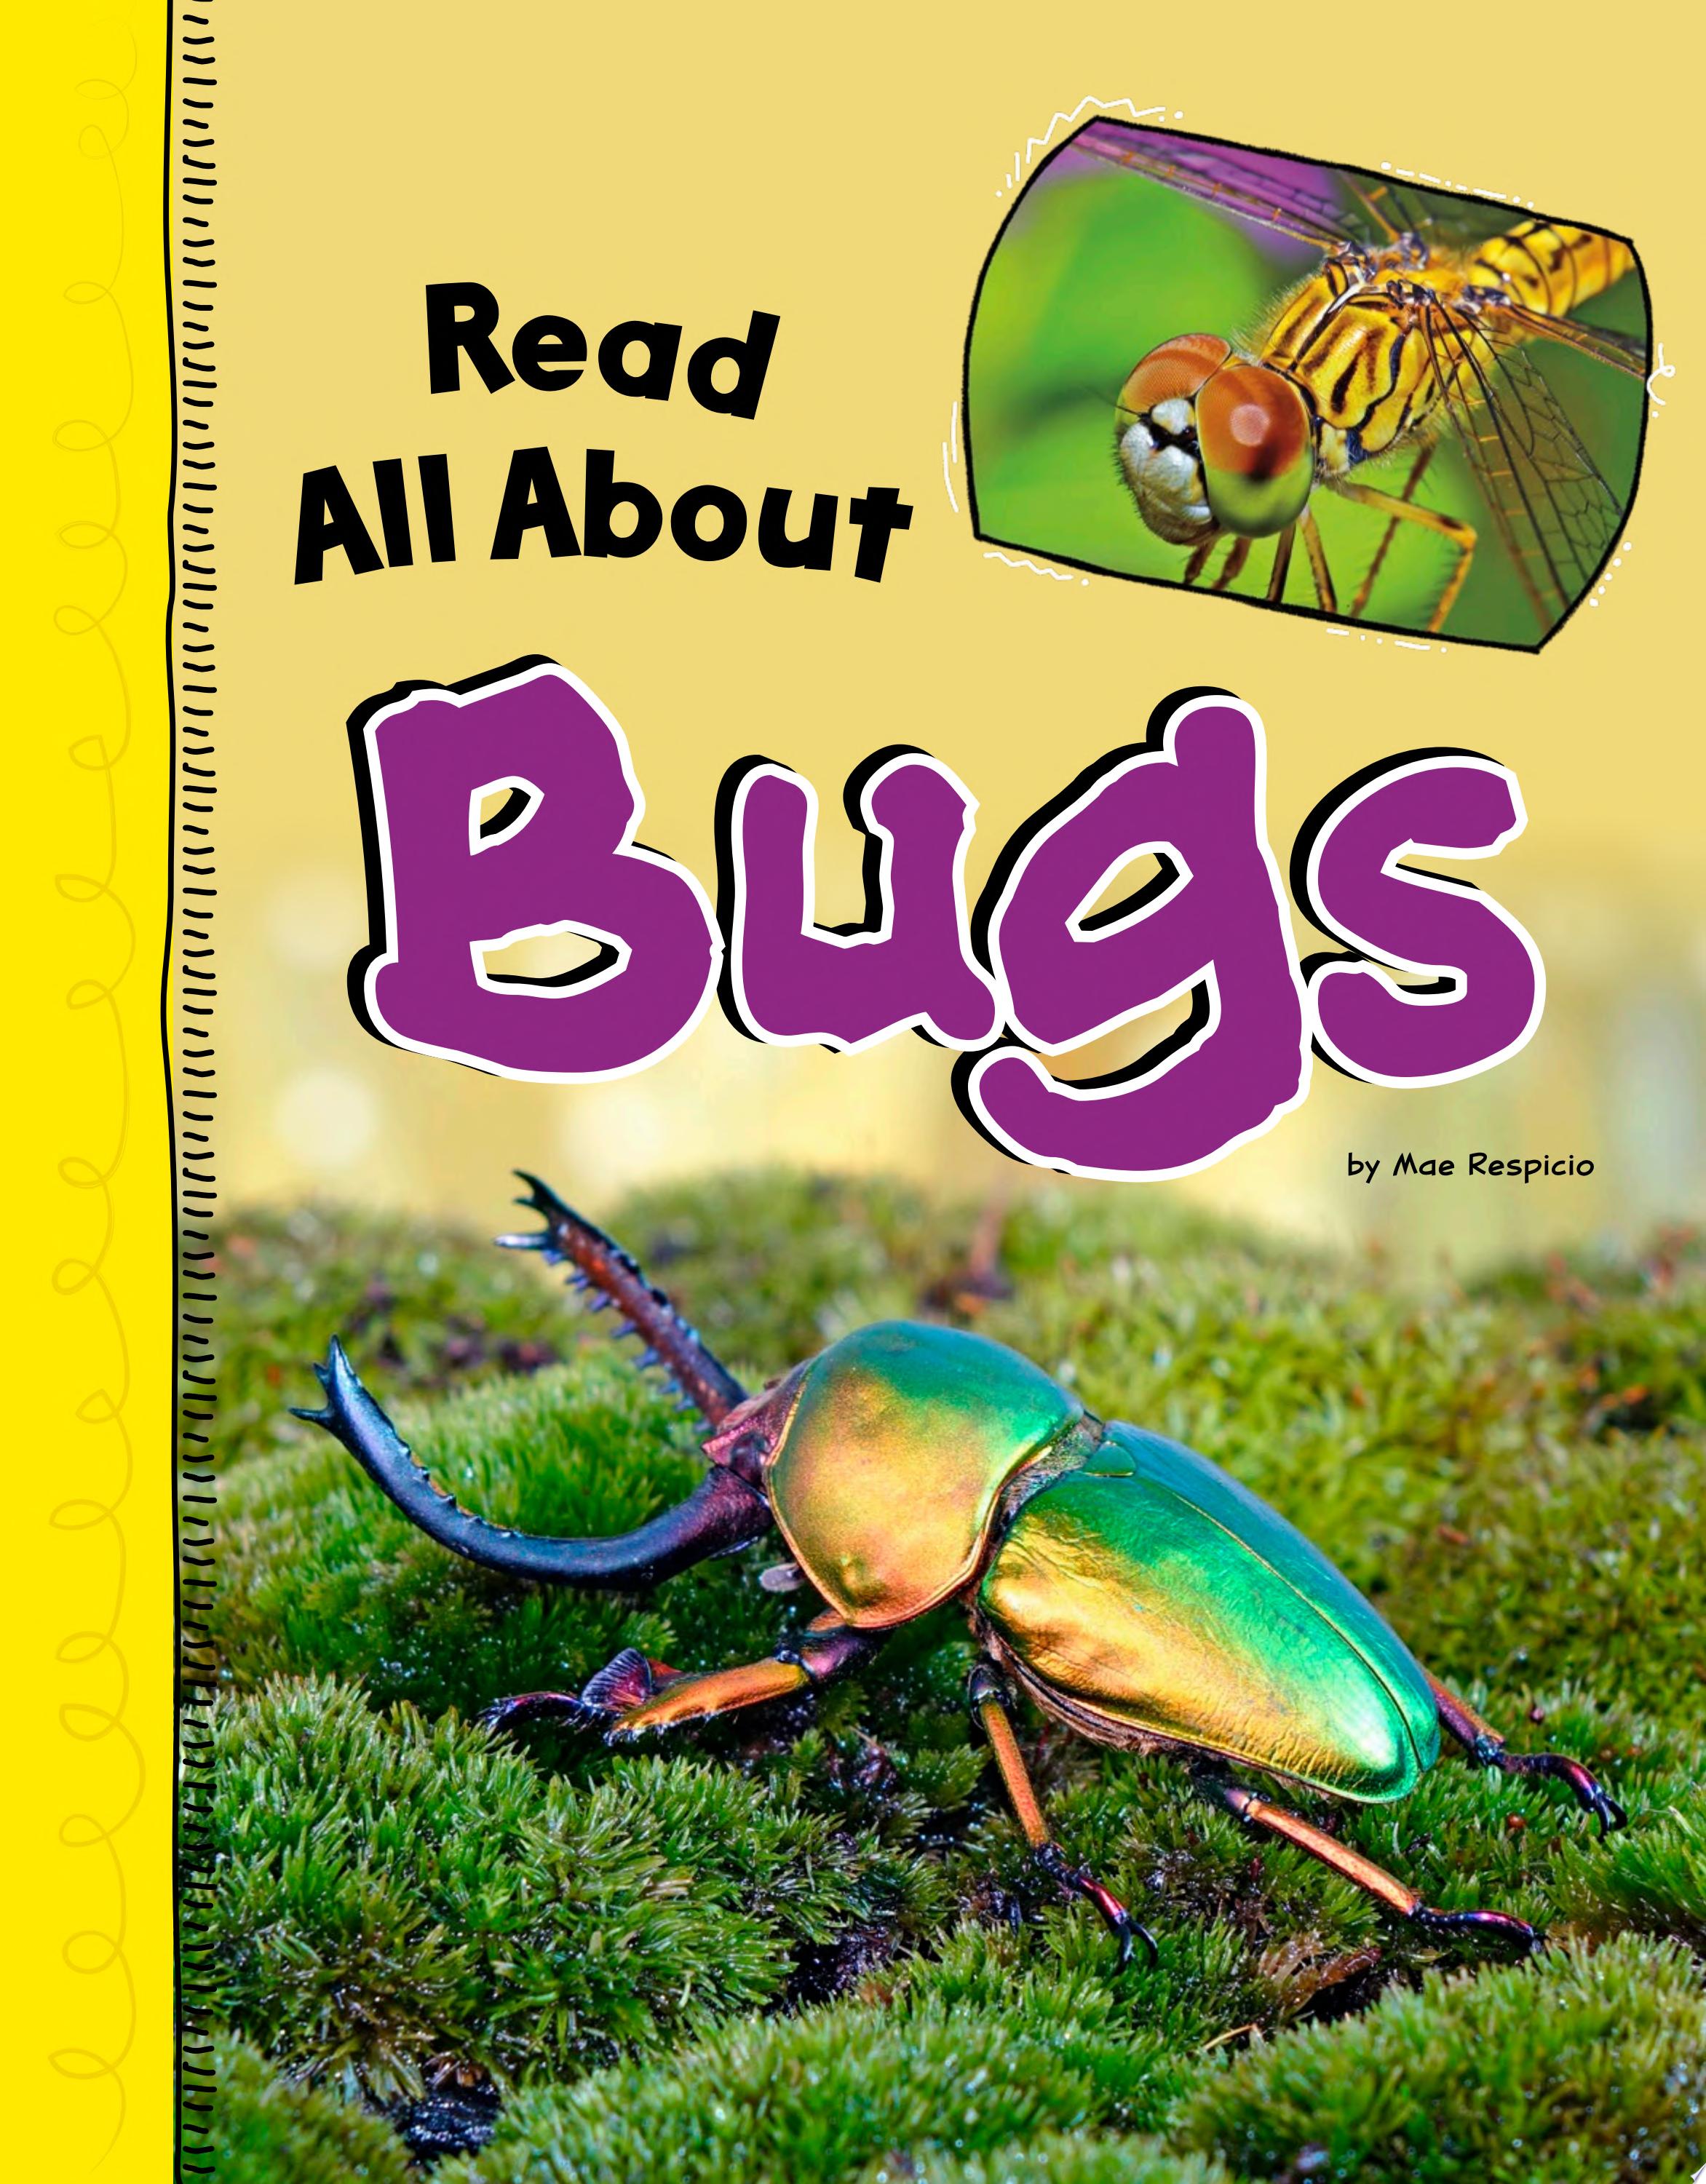 Image for "Read All about Bugs"